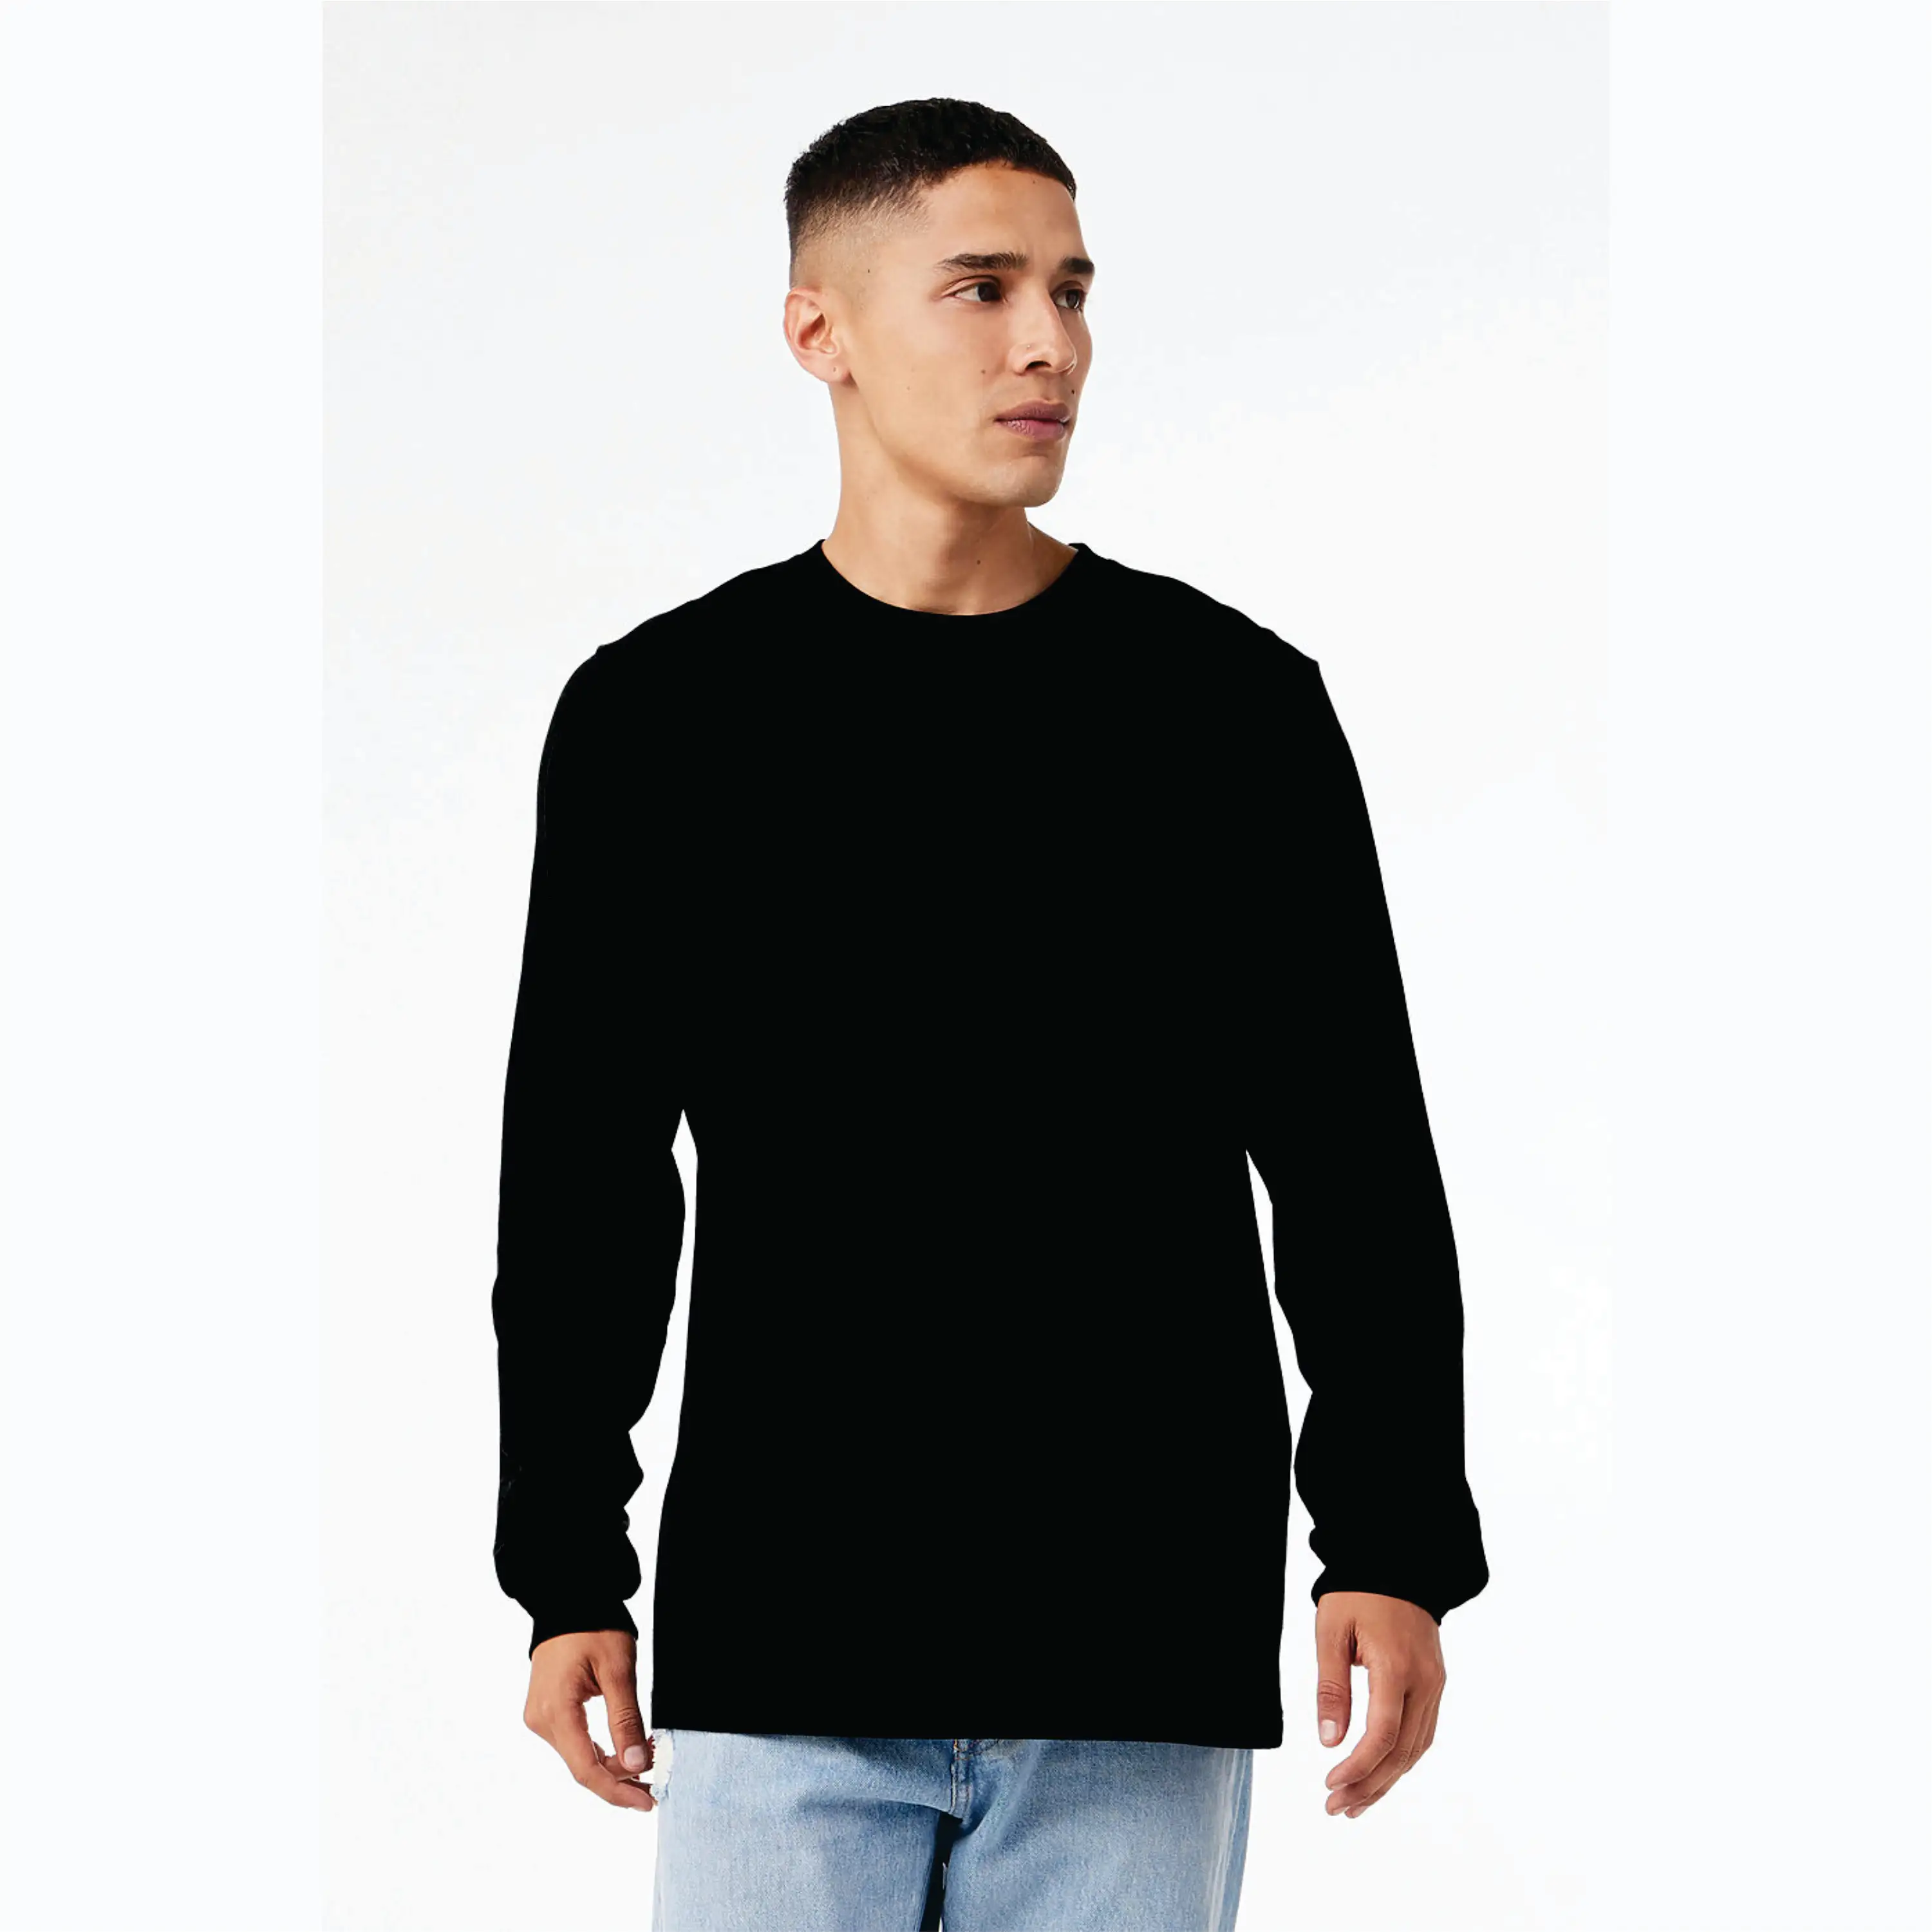 100% Airlume Combed and Ring Spun Cotton 32 Single 4.2 oz Black Classic Crew Neck Unisex Jersey Long Sleeves T-Shirt